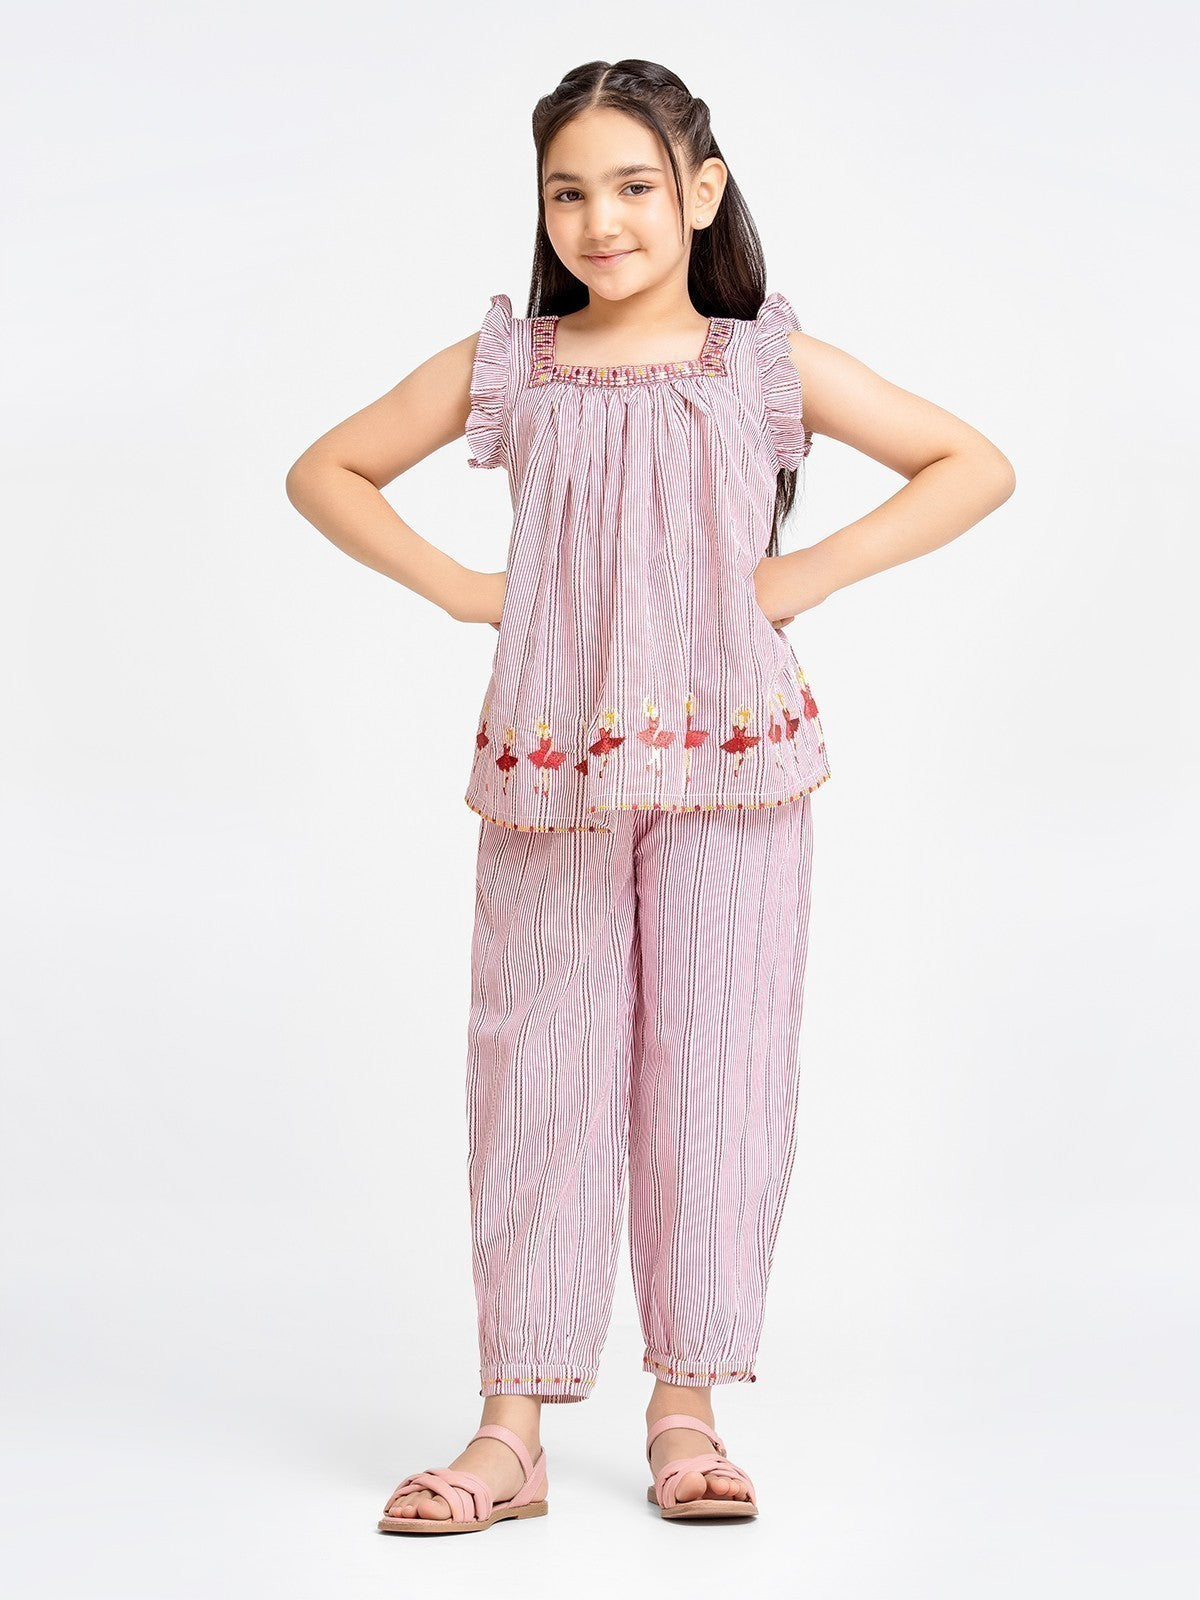 Girl's Maroon & White Co-Ord Sets - EGTCS23-011